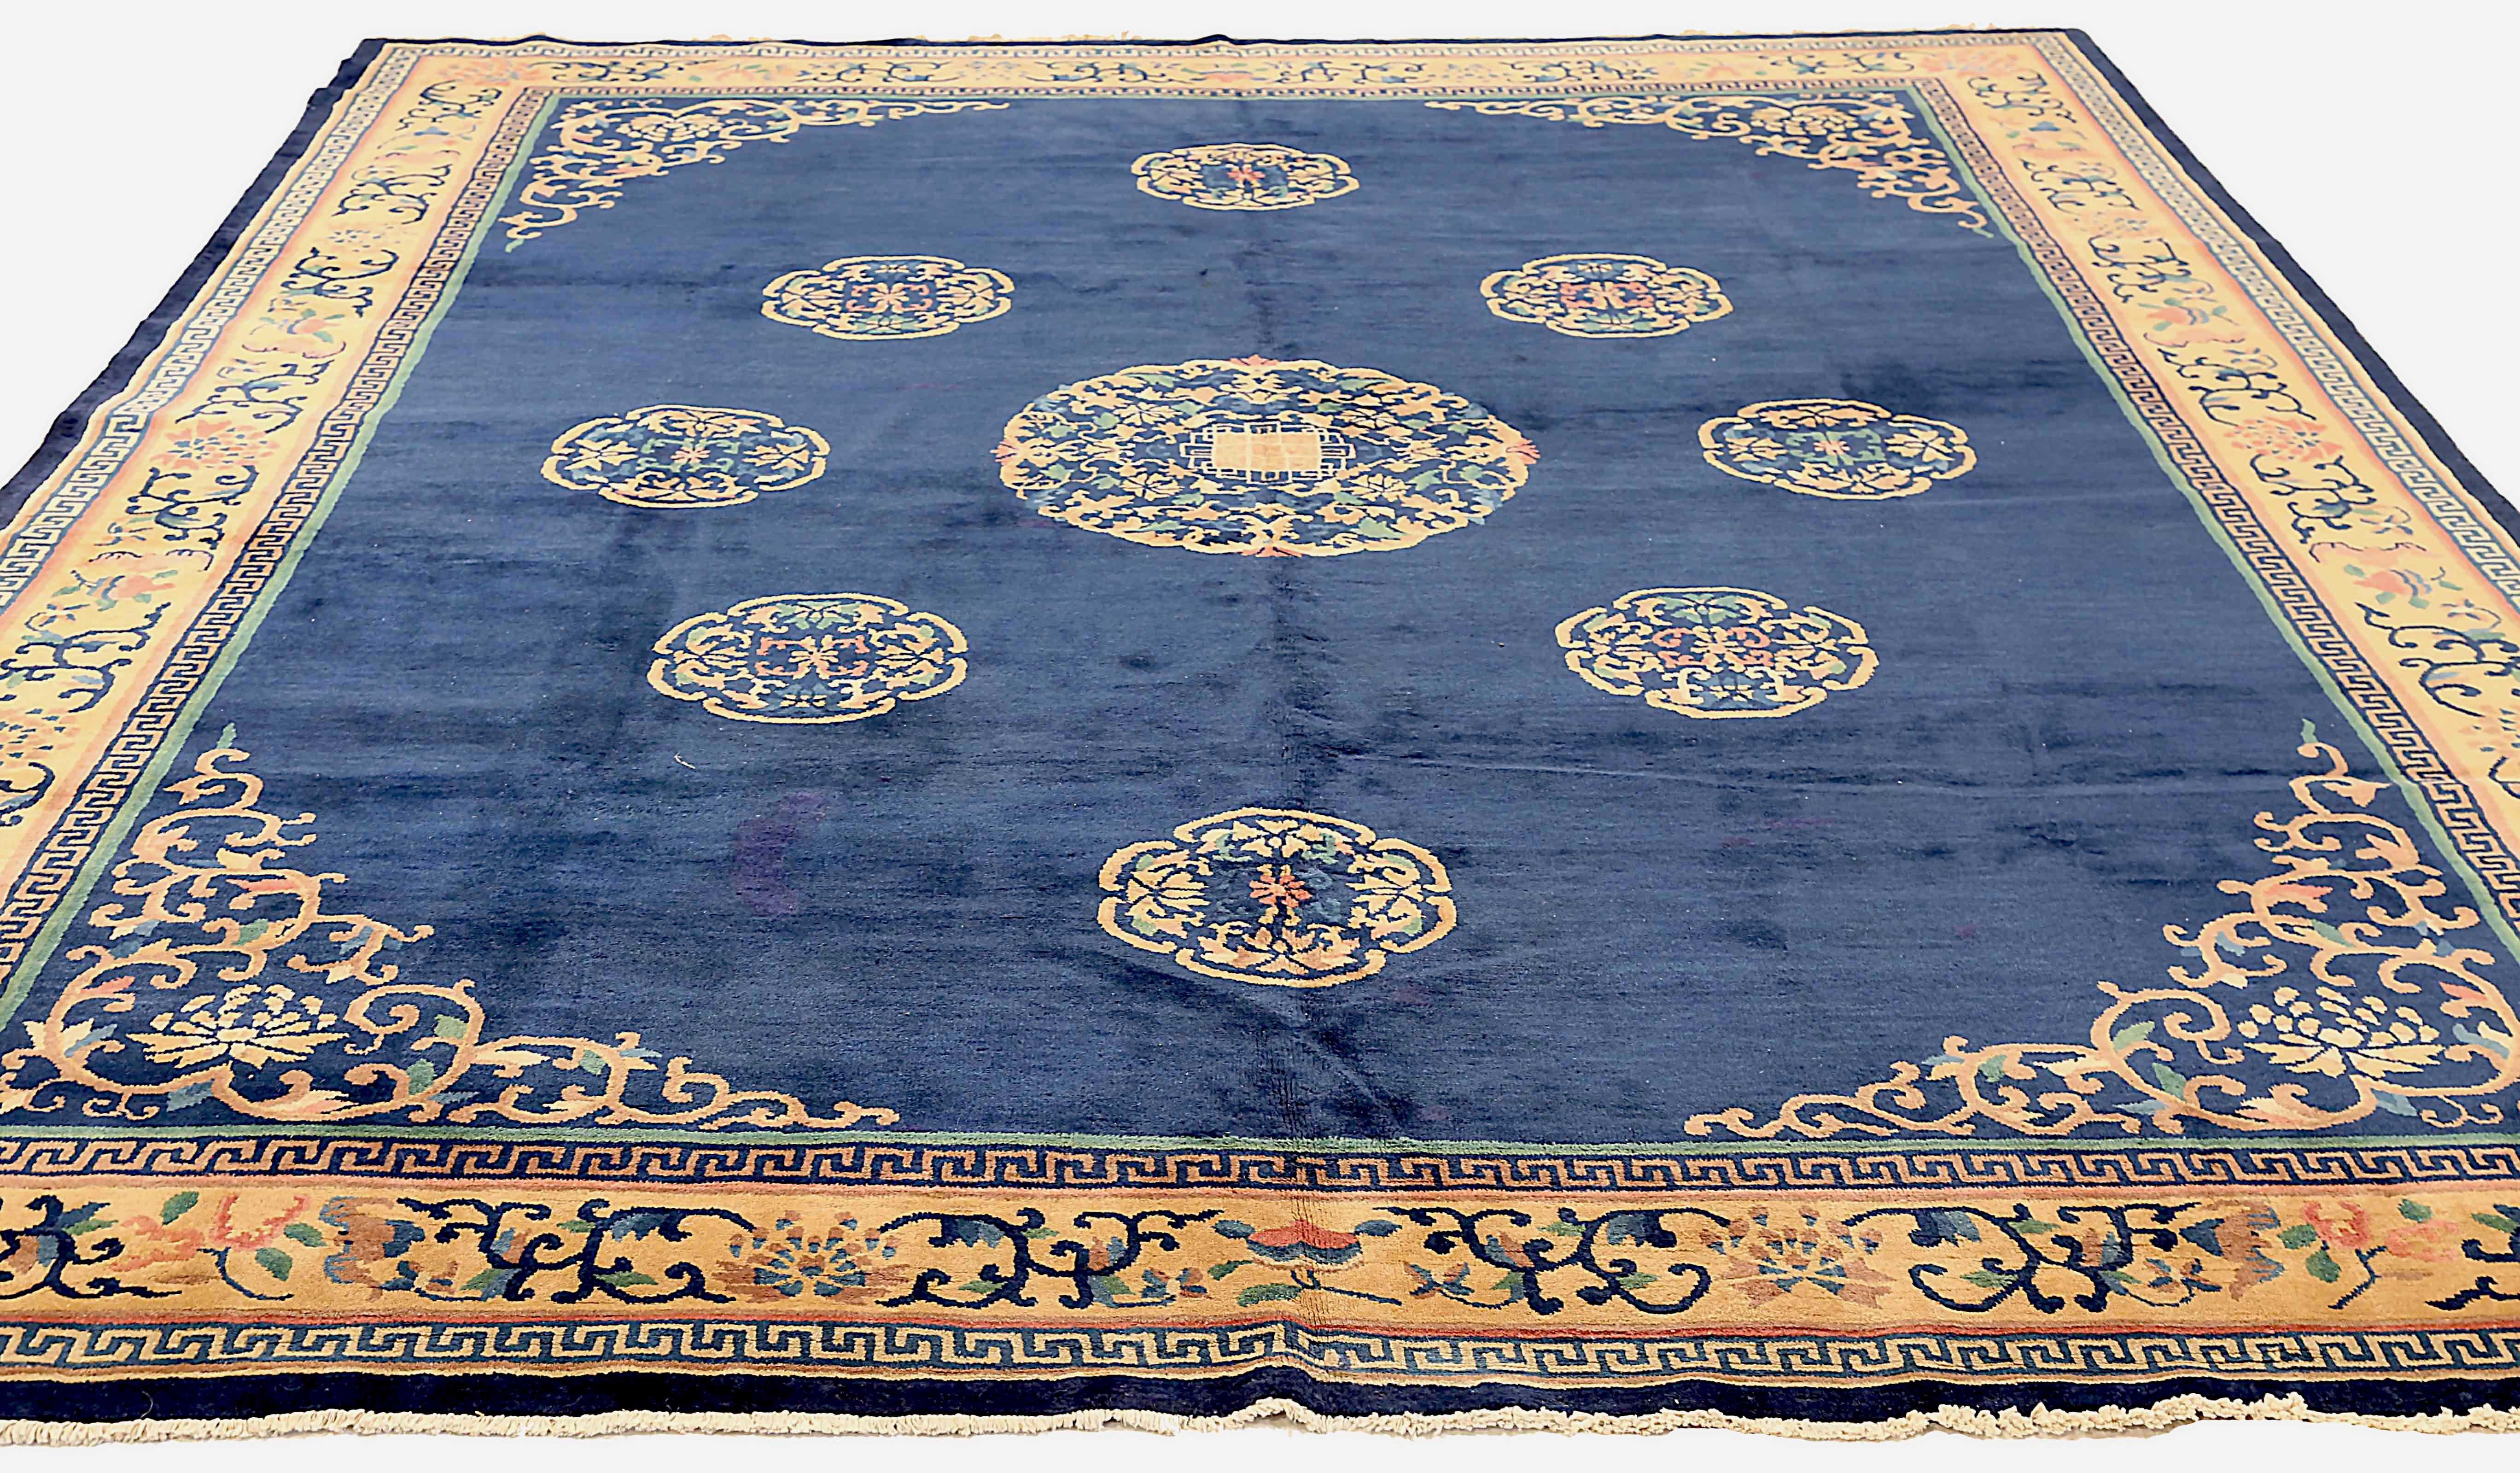 Antique Chinese area rug handwoven from the finest sheep’s wool. It’s colored with all-natural vegetable dyes that are safe for humans and pets. It’s a traditional China design handwoven by expert artisans. It’s a lovely area rug that can be